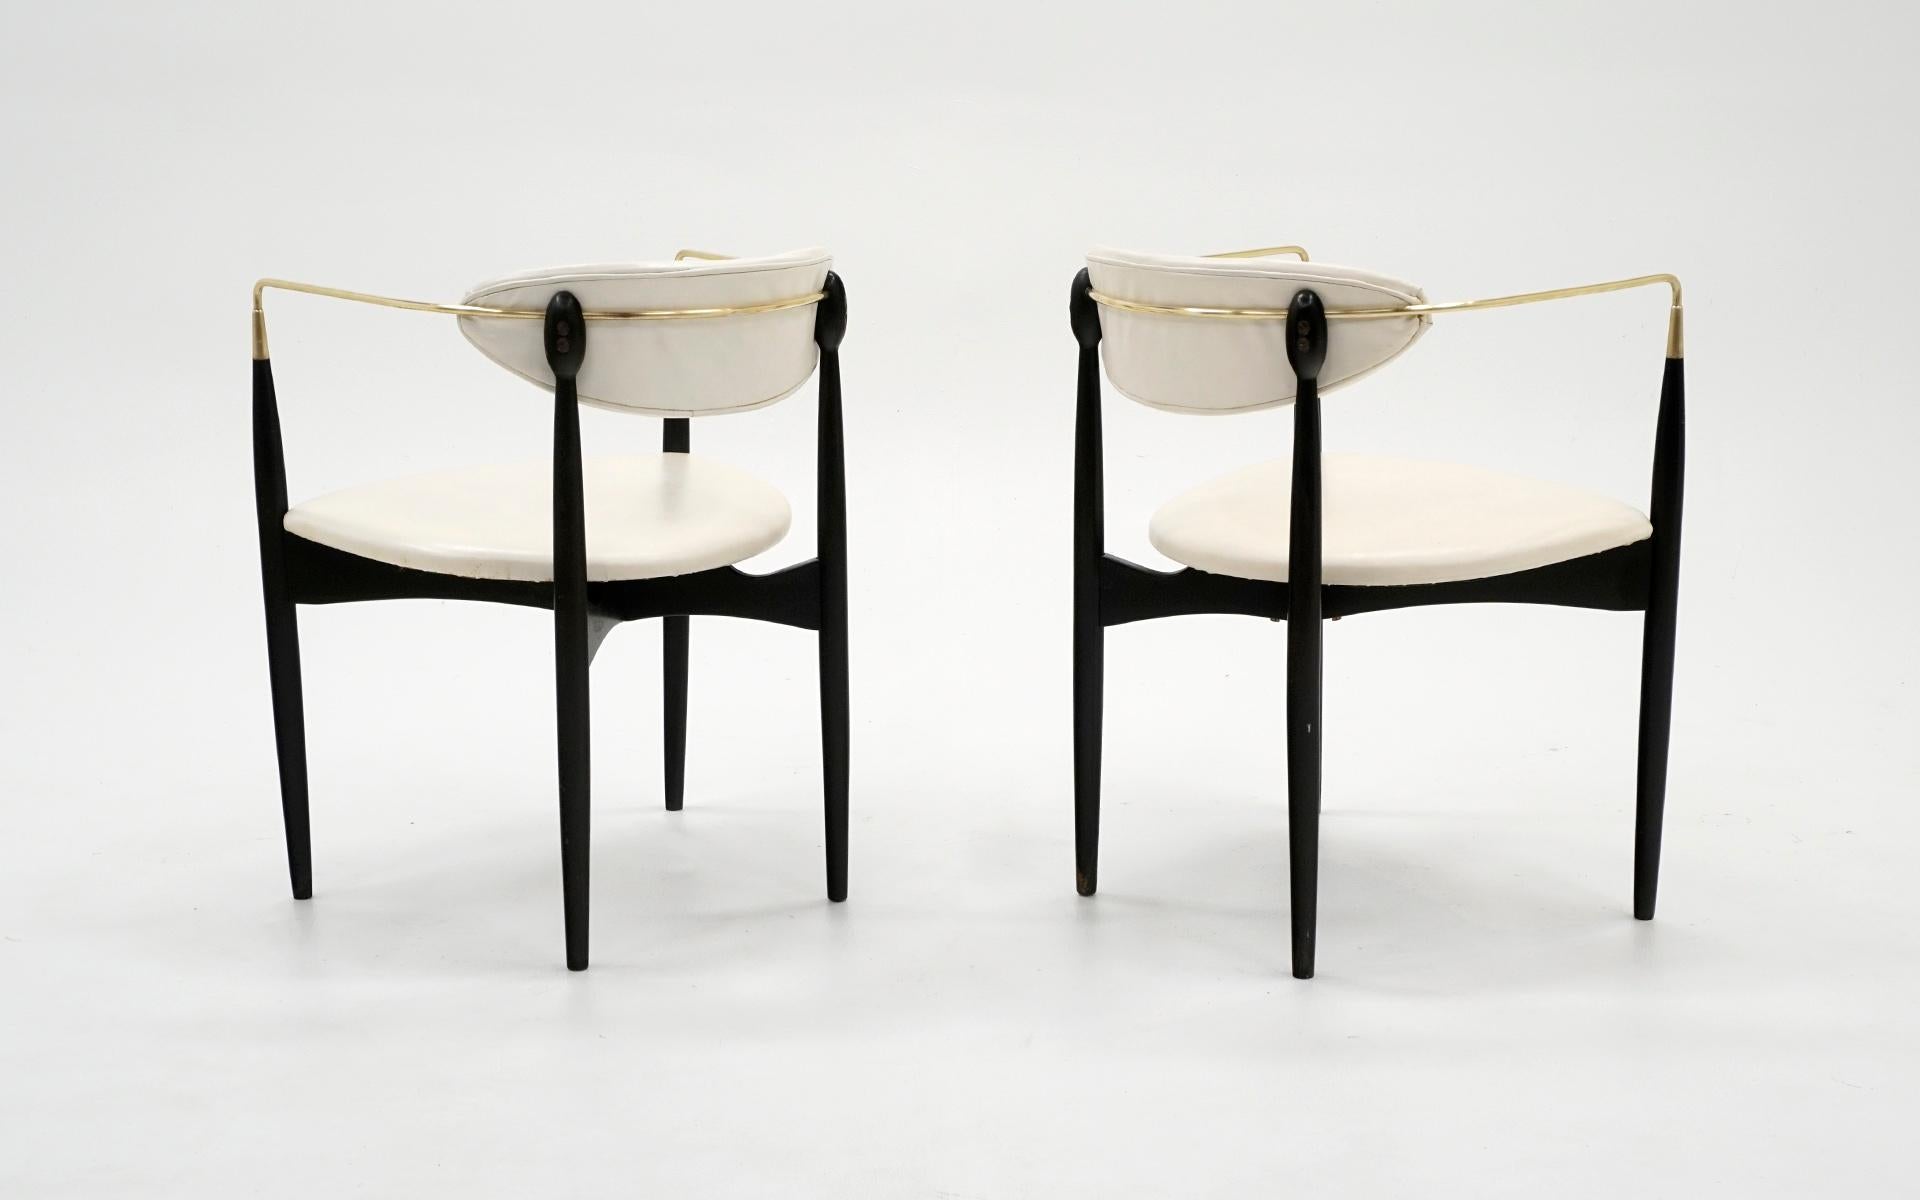 Danish Pair of Viscount Chairs by Dan Johnson, White / Ivory with Brass Arms, Original